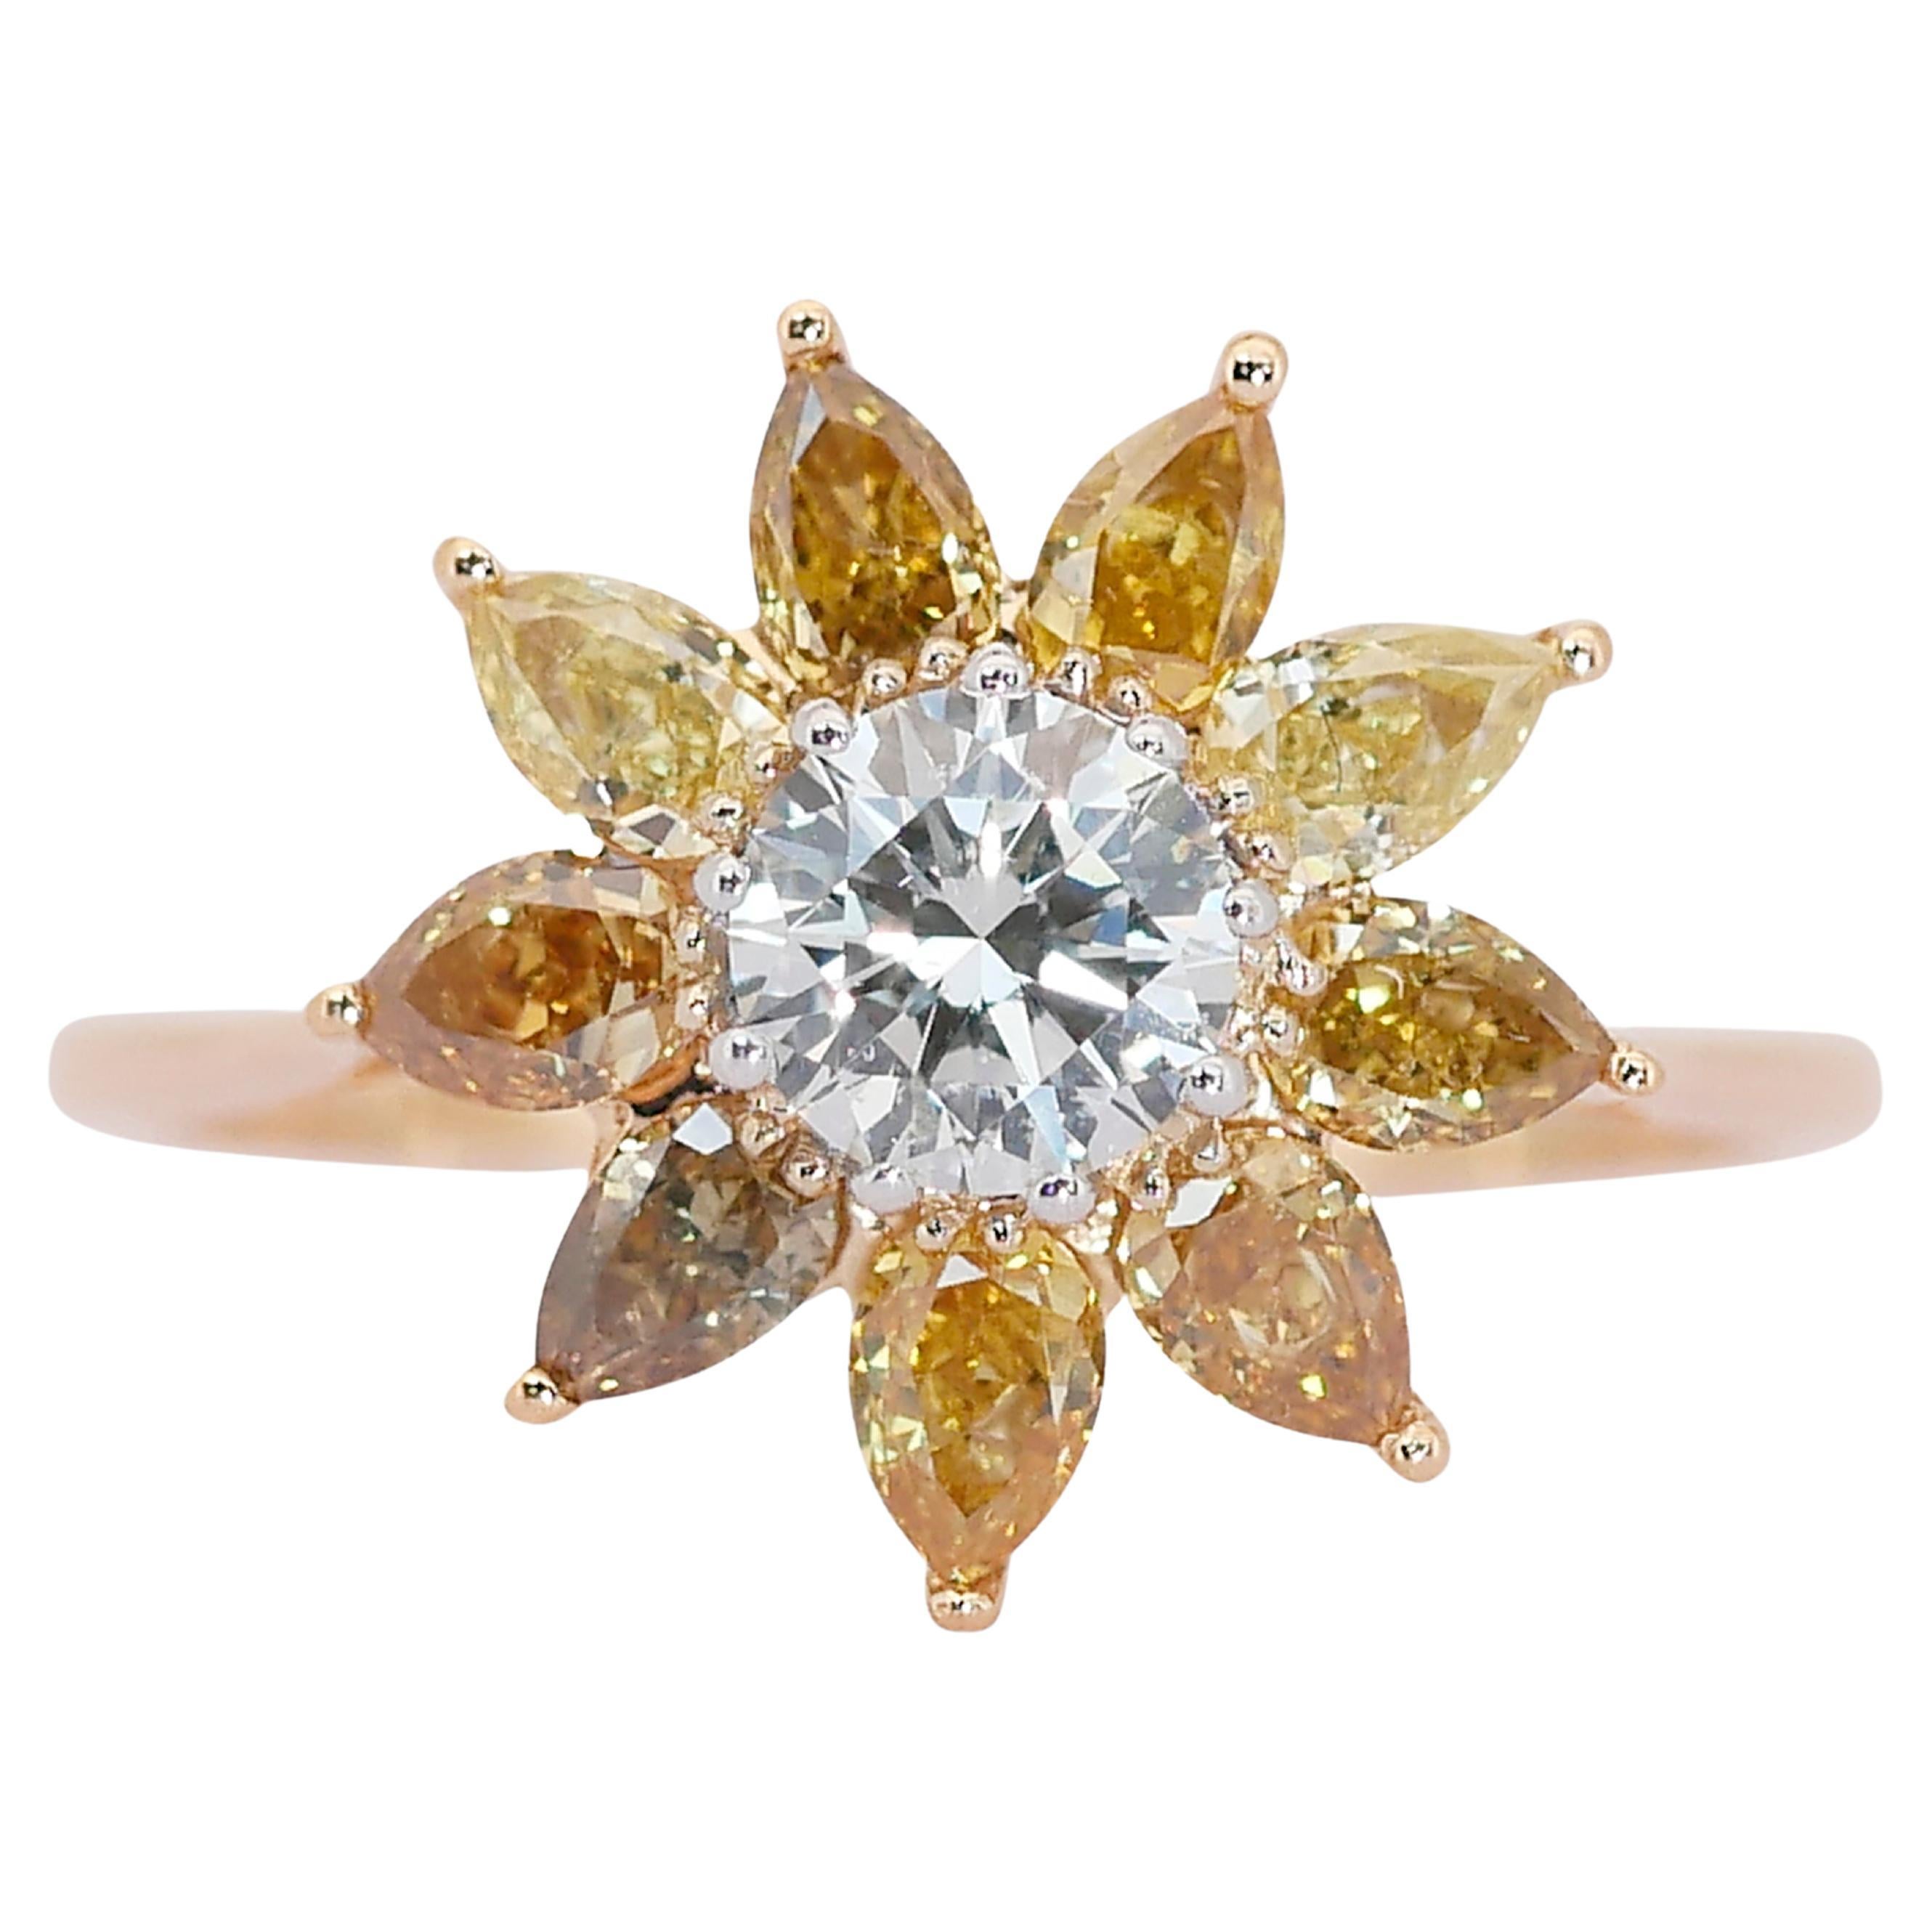 Vibrant  and one-of-a-kind 1.85 ct Fancy Colored Diamond Ring in 18k Yellow Gold For Sale